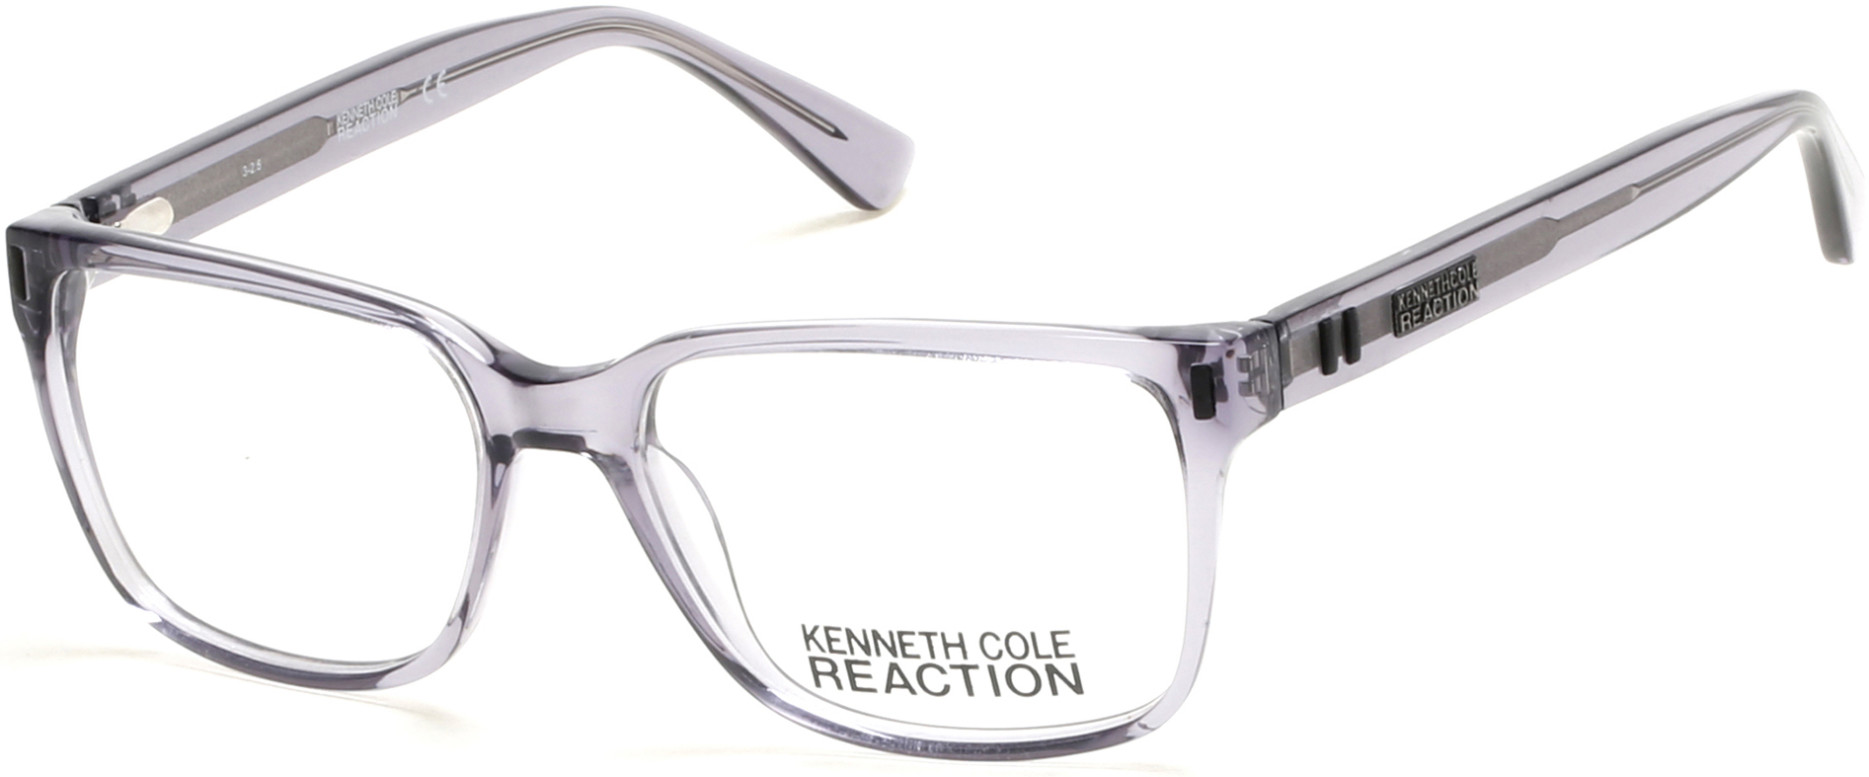 KENNETH COLE NY 0786 020